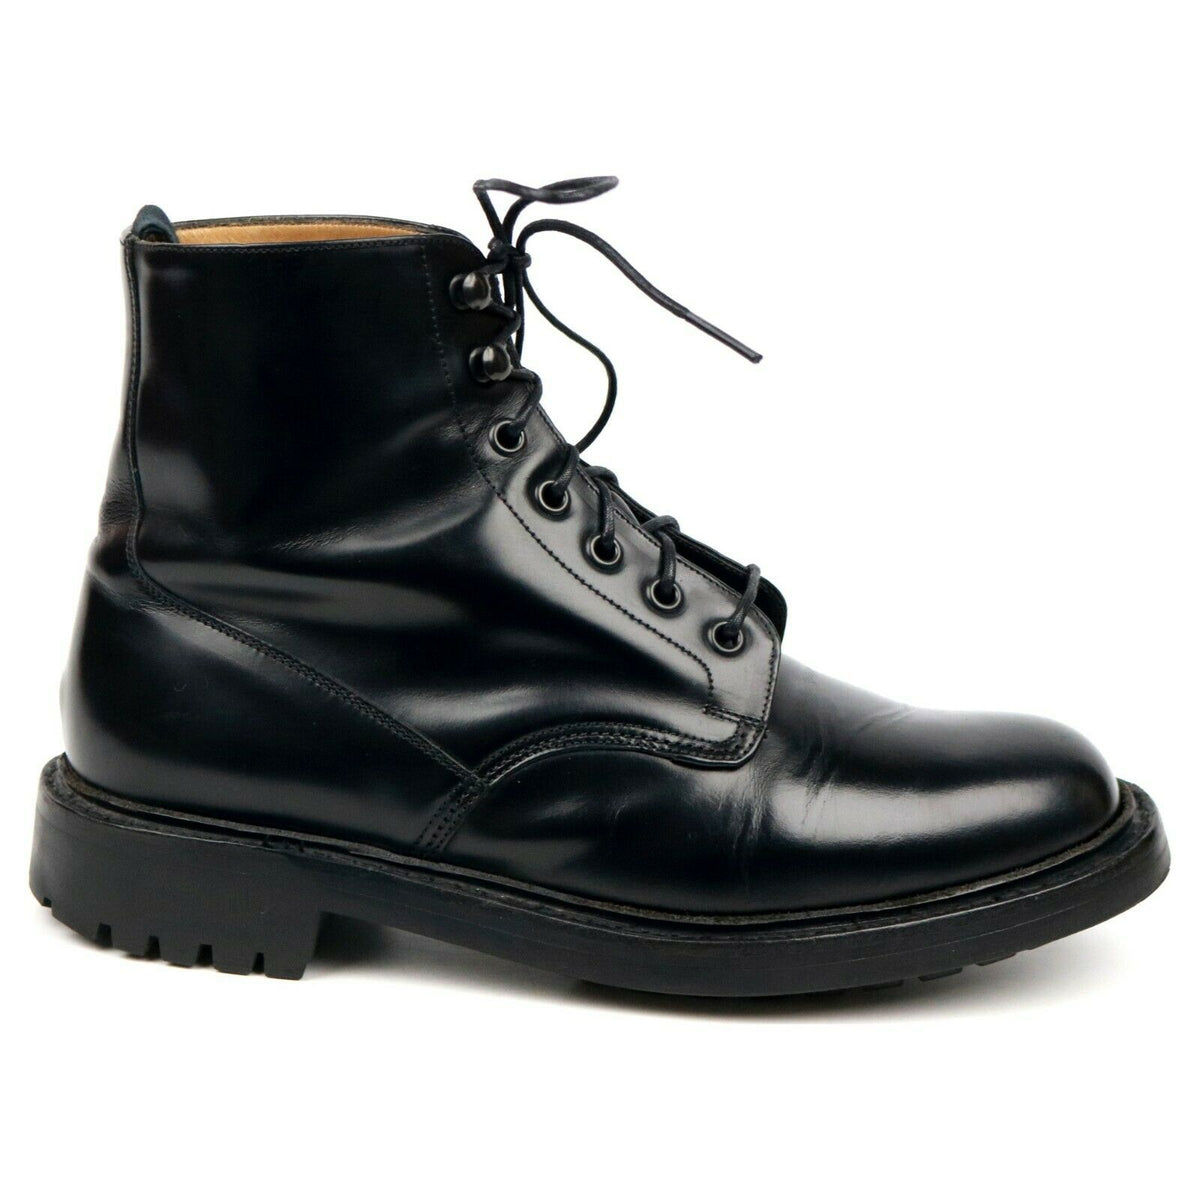 Black Leather Derby Boots UK 6.5 G 